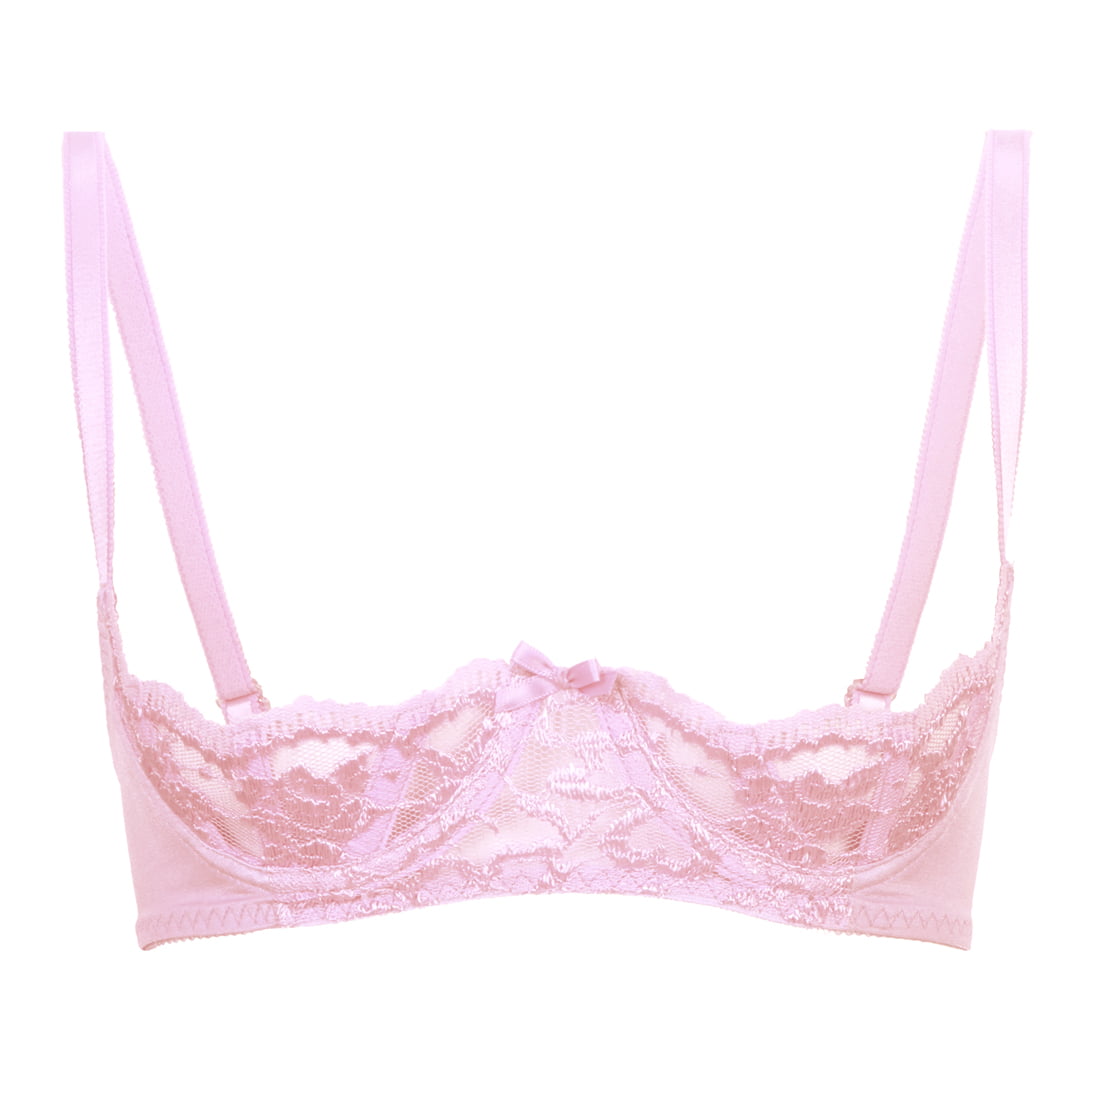 Sosexylingerie So Sexy Lingerie Tm High Shine Lace Boned And Underwired Shelf Bra 42 A C Pink